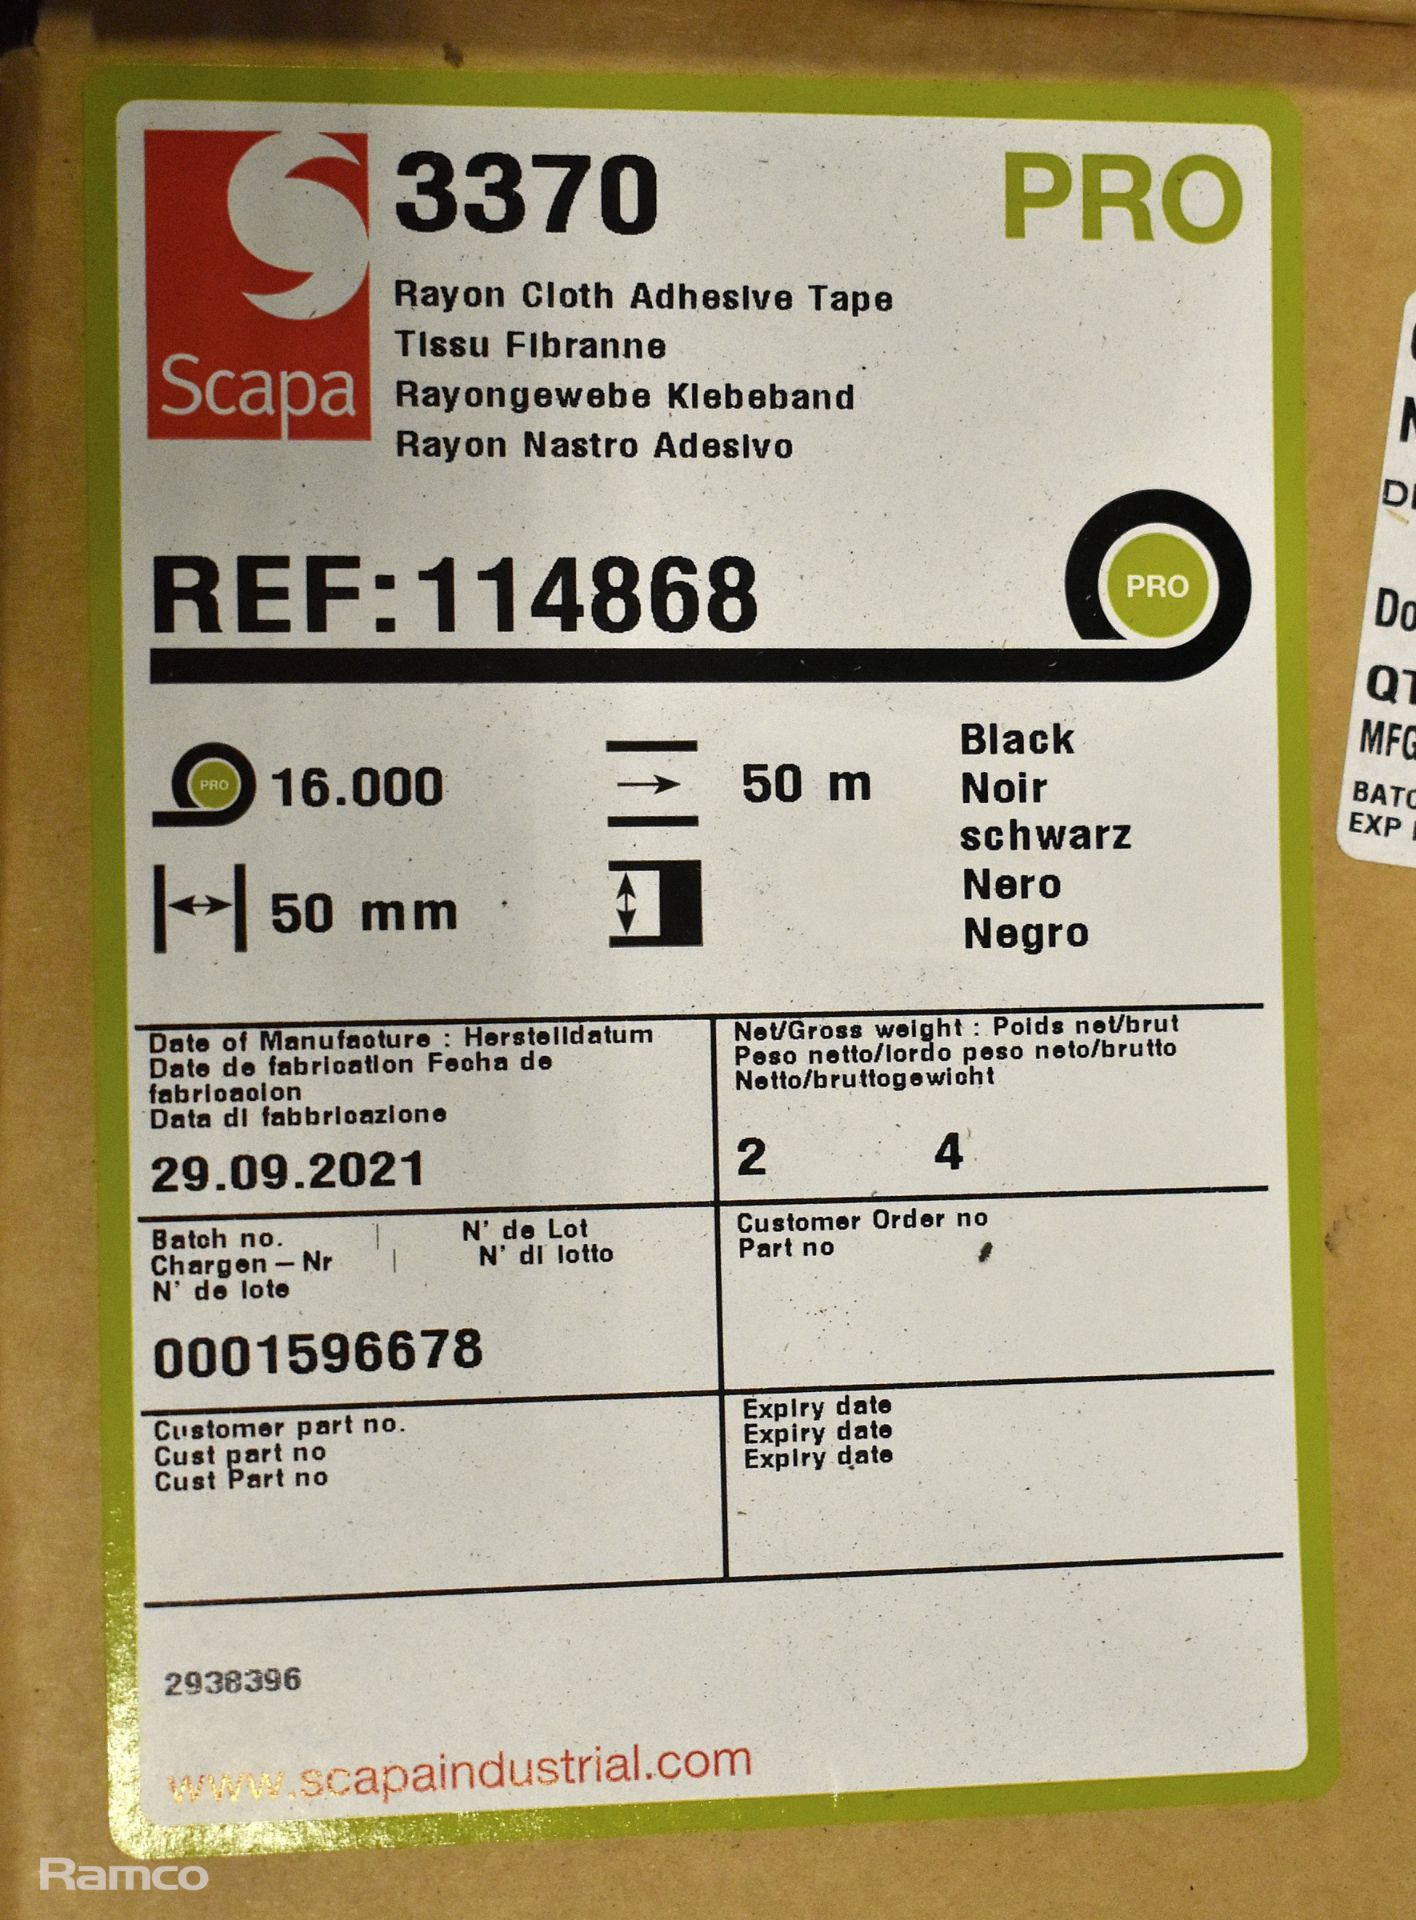 33x boxes of Scapa 3370 Rayon cloth fabric black adhesive tape - 50mm width - 50m length - Image 3 of 3